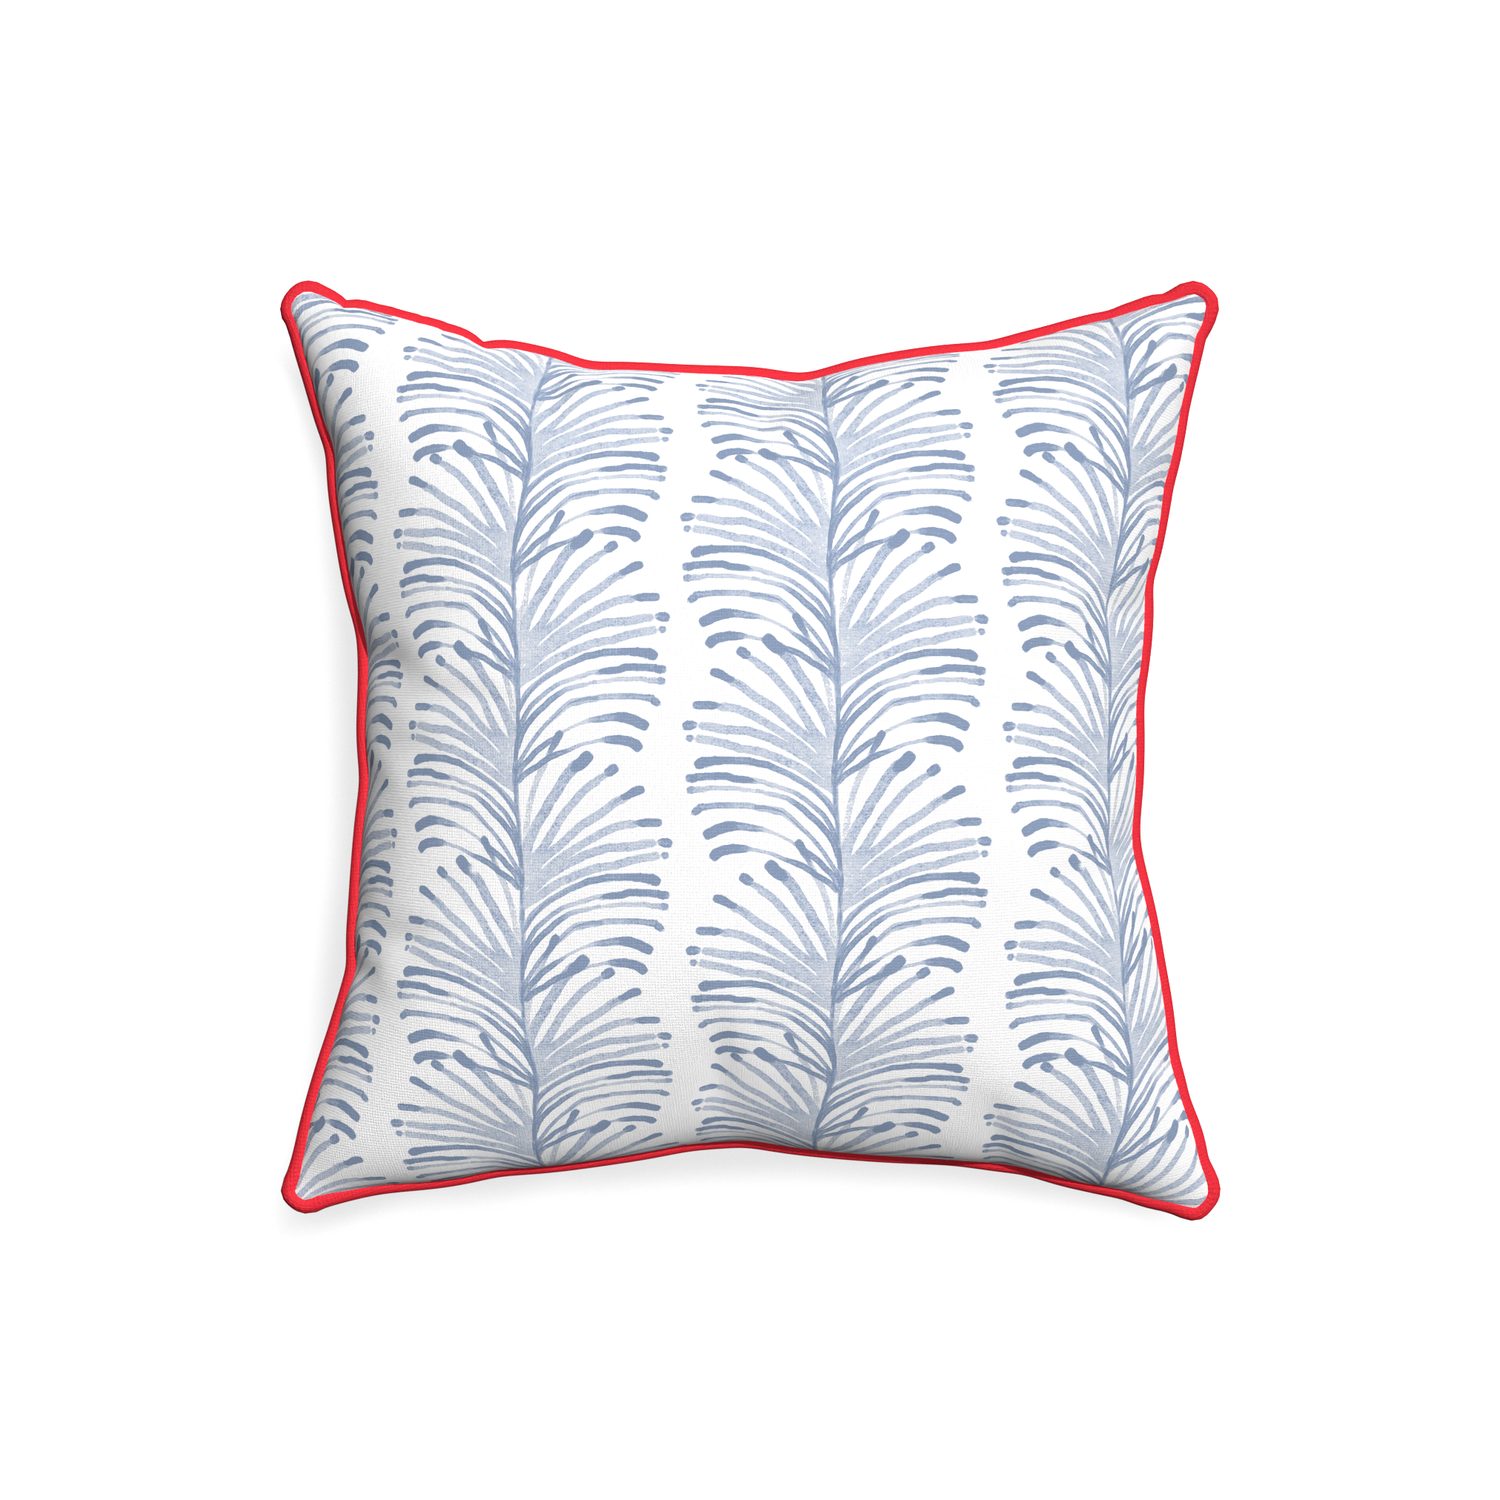 20-square emma sky custom sky blue botanical stripepillow with cherry piping on white background